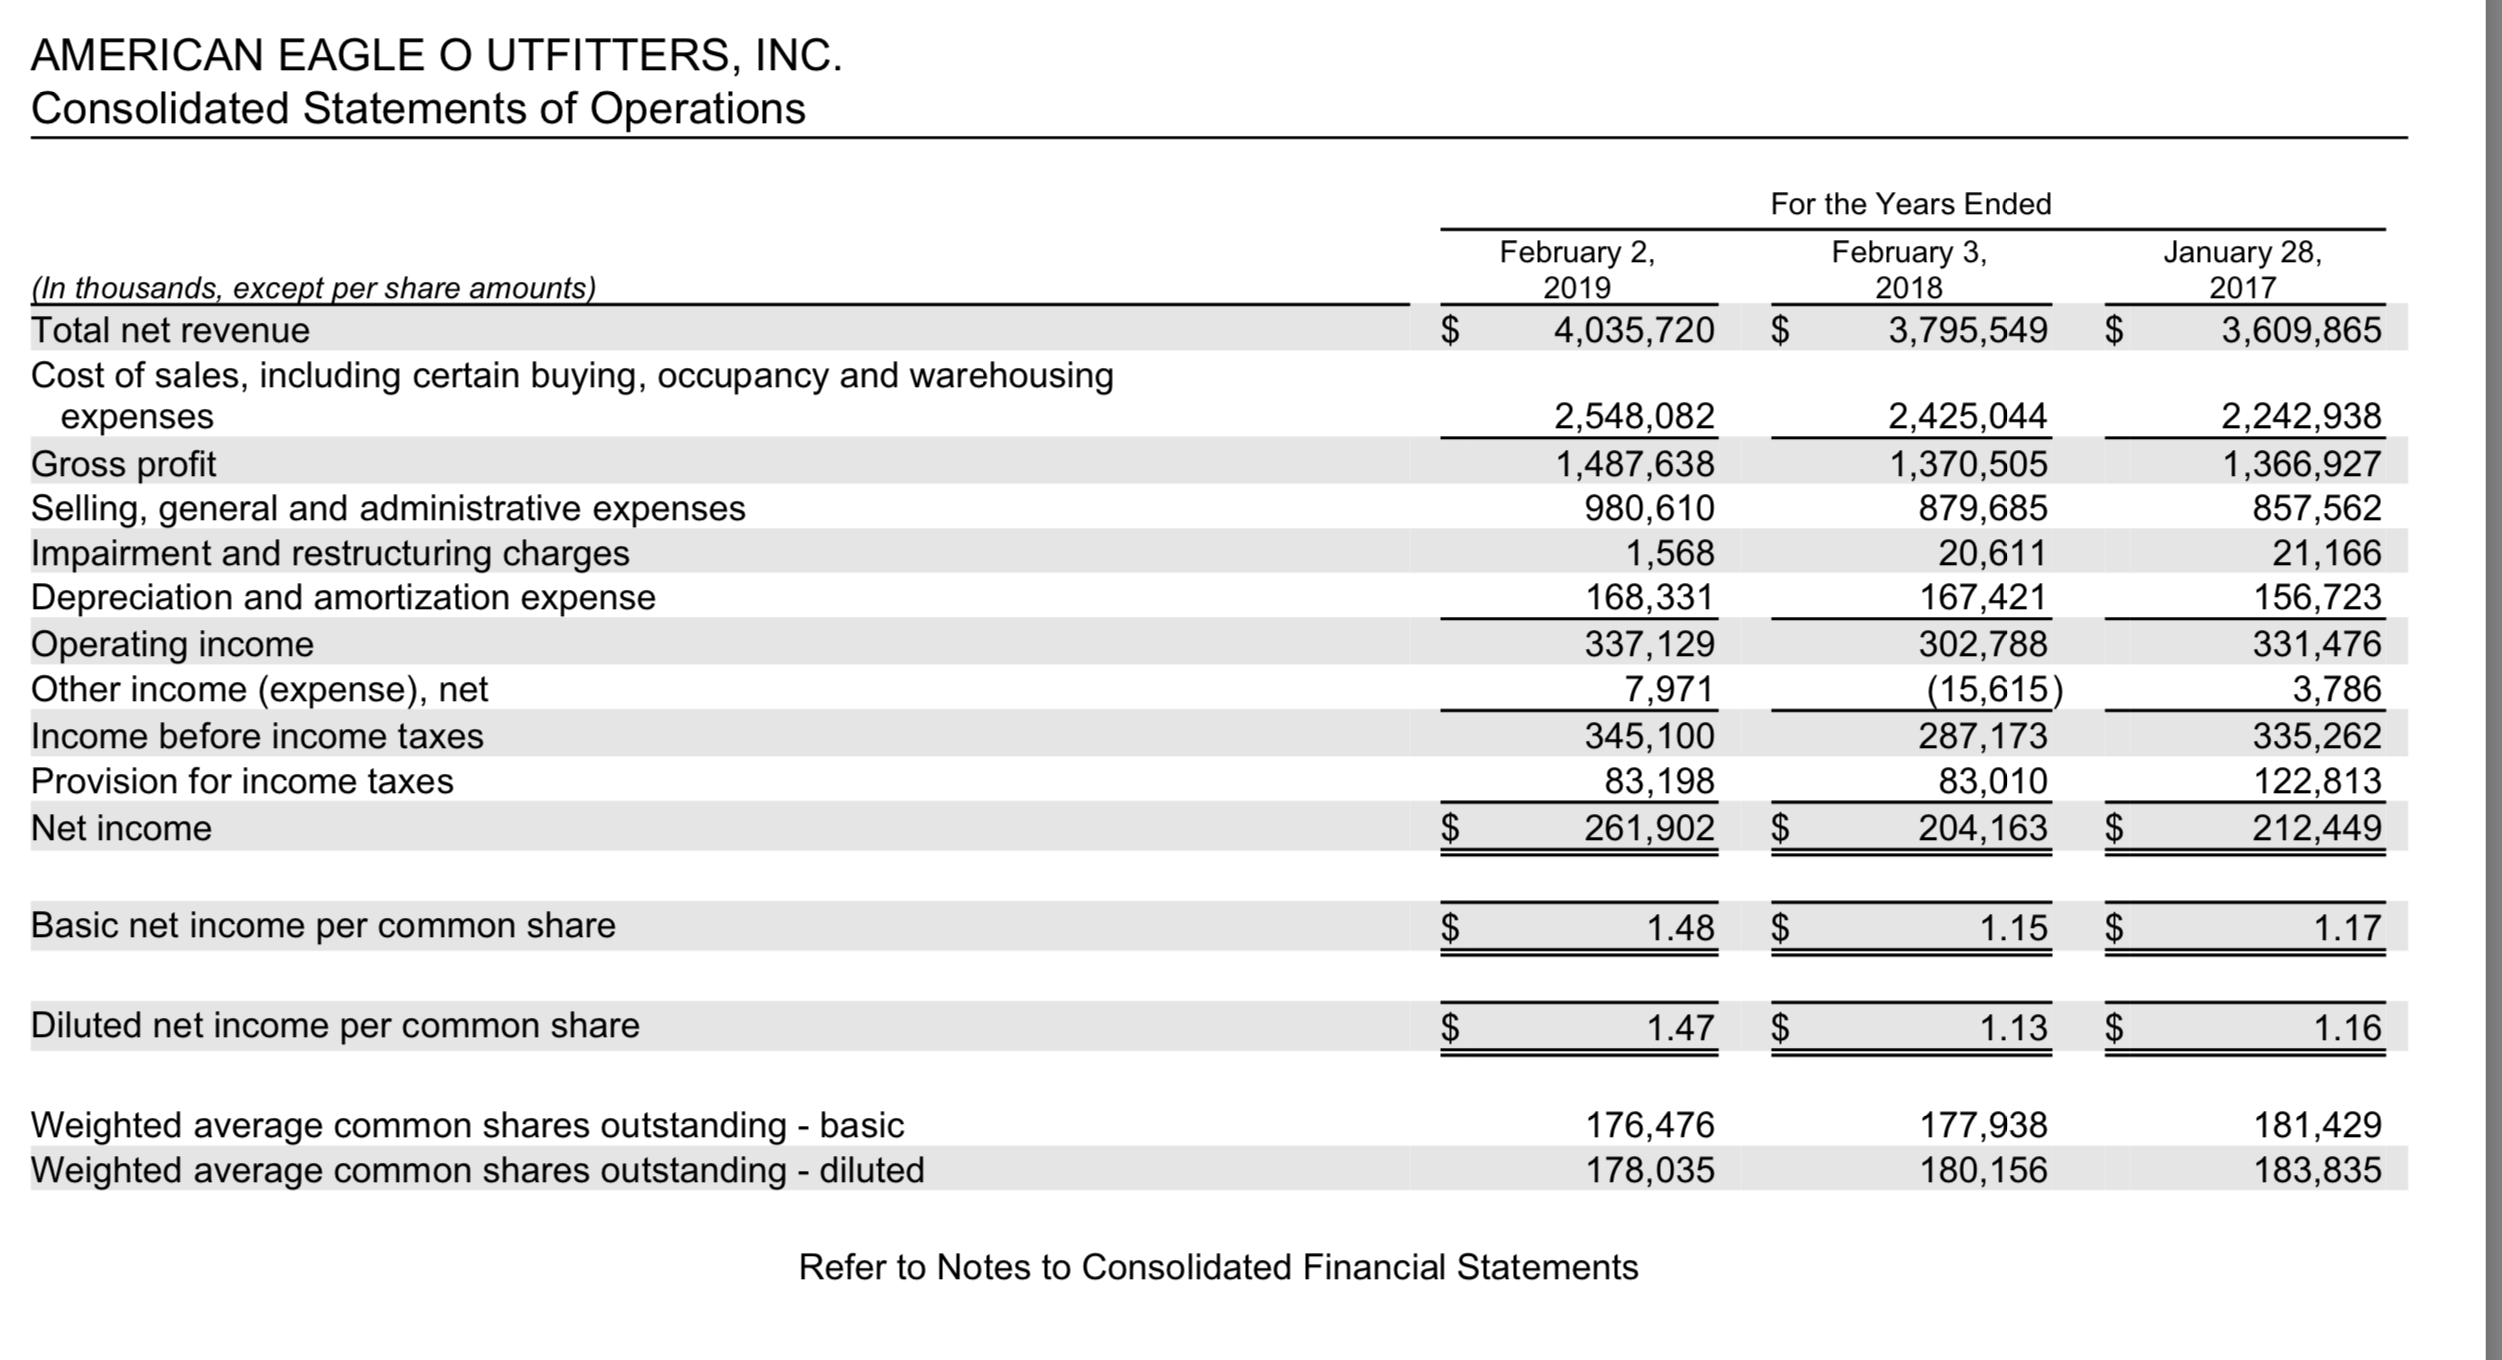 AMERICAN EAGLE O UTFITTERS, INC.
Consolidated Statements of Operations
For the Years Ended
(In thousands, except per share amounts)
Total net revenue
February 2,
2019
February 3,
2018
3,795,549
January 28,
2017
3,609,865
4,035,720
Cost of sales, including certain buying, occupancy and warehousing
expenses
2,548,082
2,425,044
2,242,938
Gross profit
Selling, general and administrative expenses
Impairment and restructuring charges
Depreciation and amortization expense
Operating income
Other income (expense), net
1,487,638
980,610
1,568
1,370,505
879,685
20,611
1,366,927
857,562
21,166
156,723
331,476
3,786
335,262
168,331
337,129
167,421
302,788
|(15,615)
287,173
7,971
345,100
83,198
261,902
Income before income taxes
Provision for income taxes
83,010
122,813
212,449
Net income
$
204,163
$
Basic net income per common share
1.48
$
1.15
1.17
Diluted net income per common share
1.47
$
1.13
1.16
Weighted average common shares outstanding - basic
Weighted average common shares outstanding - diluted
176,476
178,035
177,938
180,156
181,429
183,835
Refer to Notes to Consolidated Financial Statements
